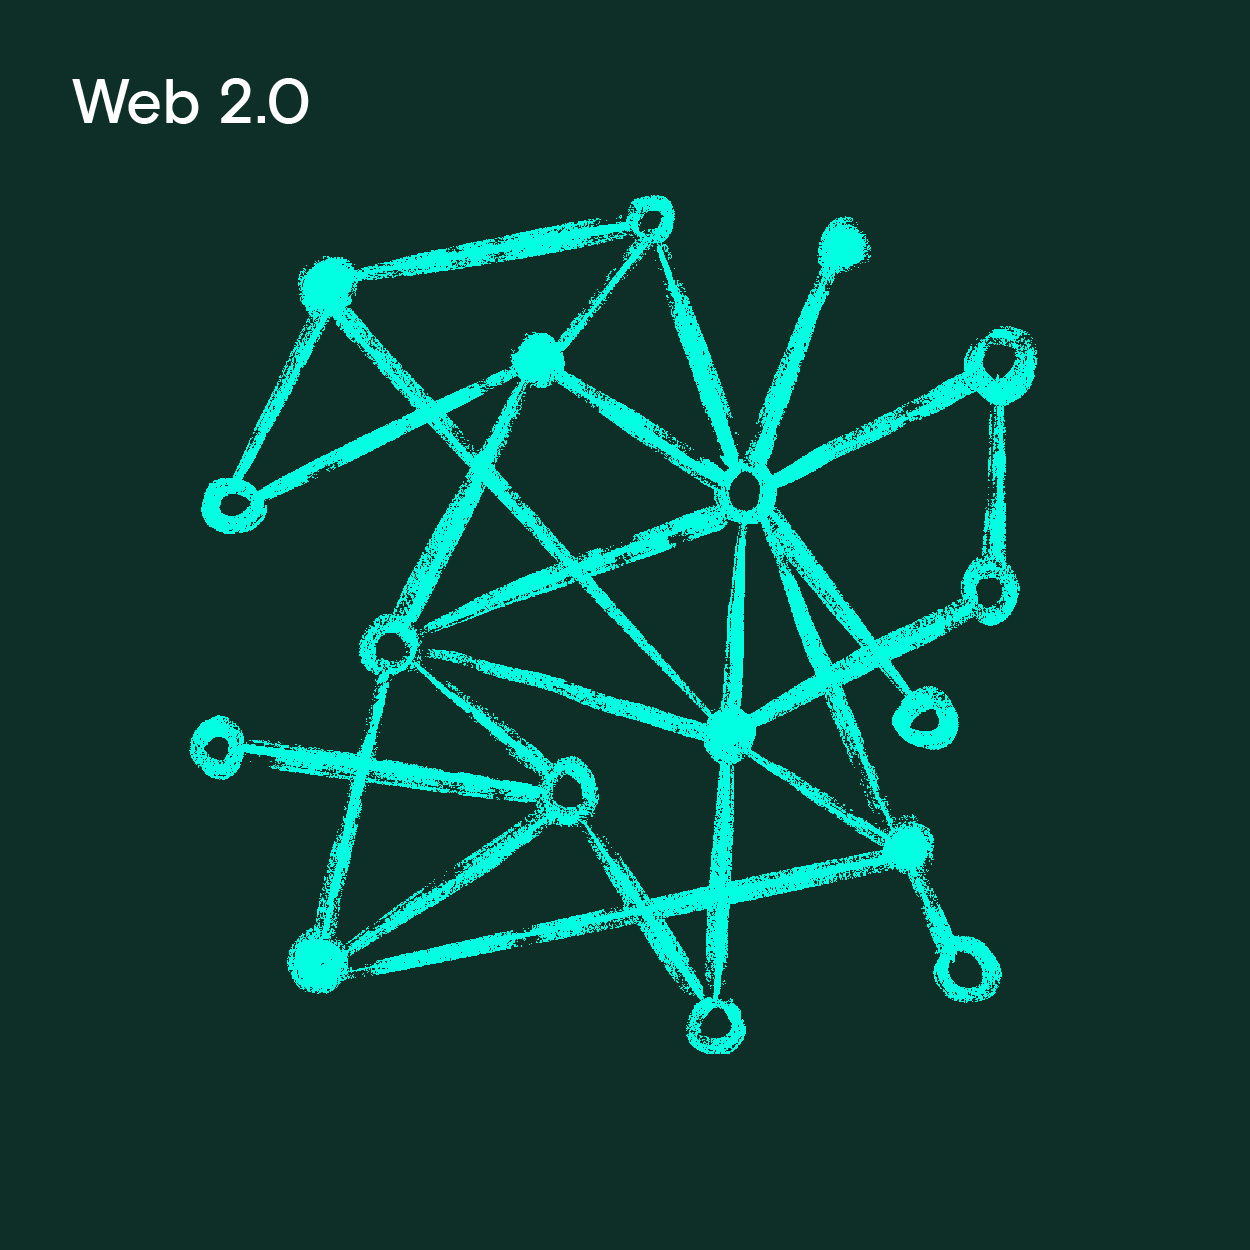 Web 2.0 - hand drawn infographic - a series of dots with interconnecting lines representing Web2 and read-write web